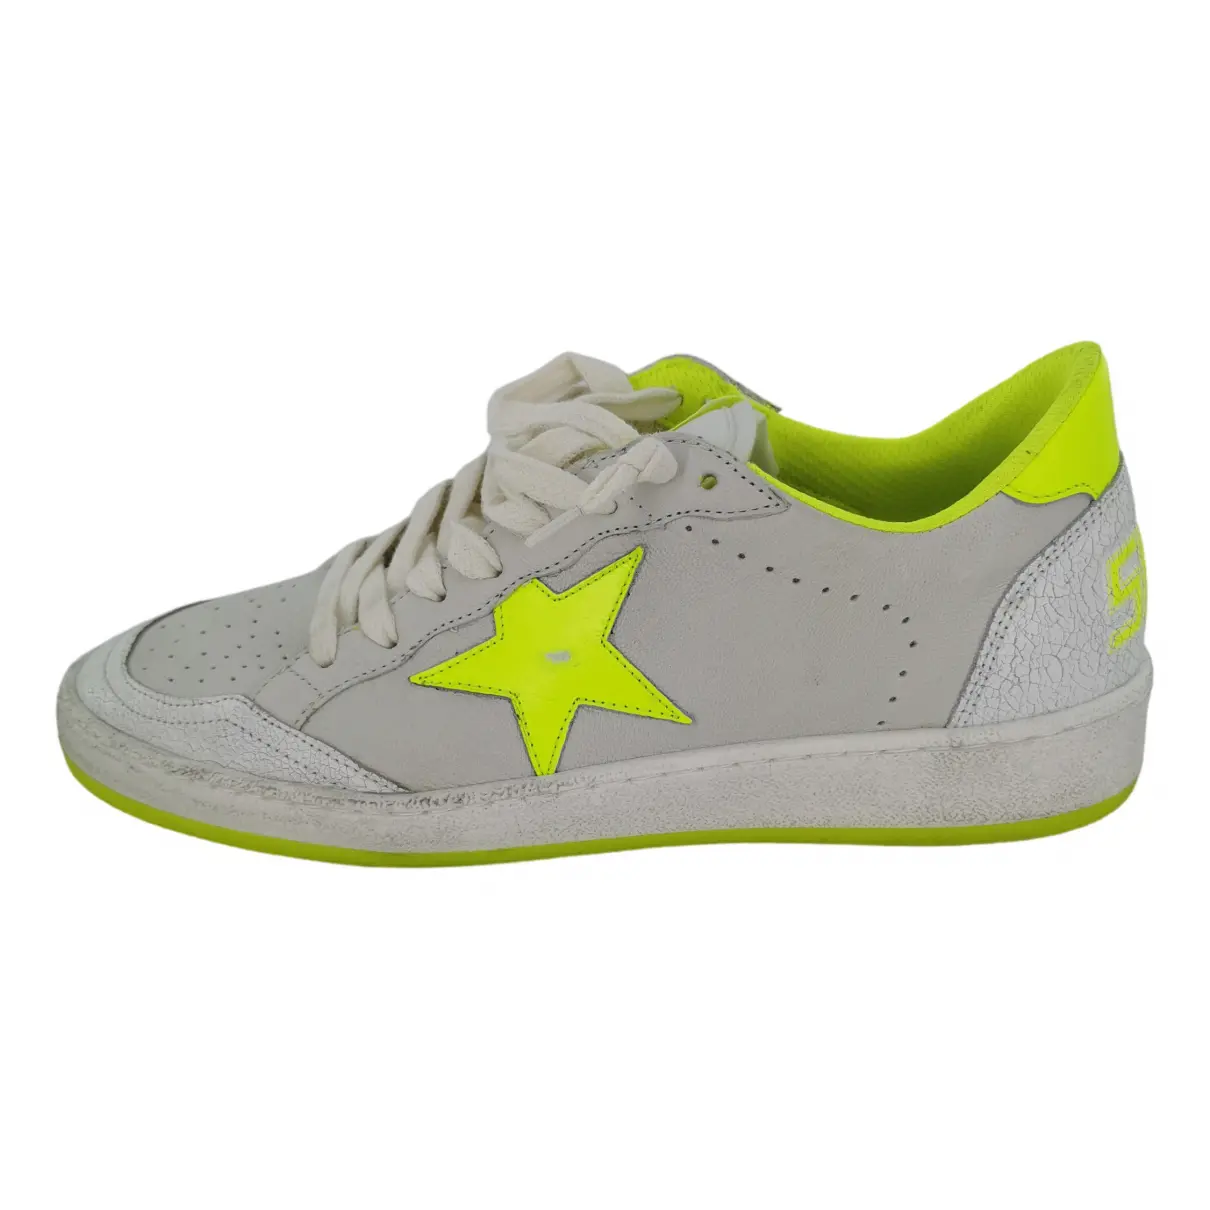 Ball Star leather trainers Golden Goose